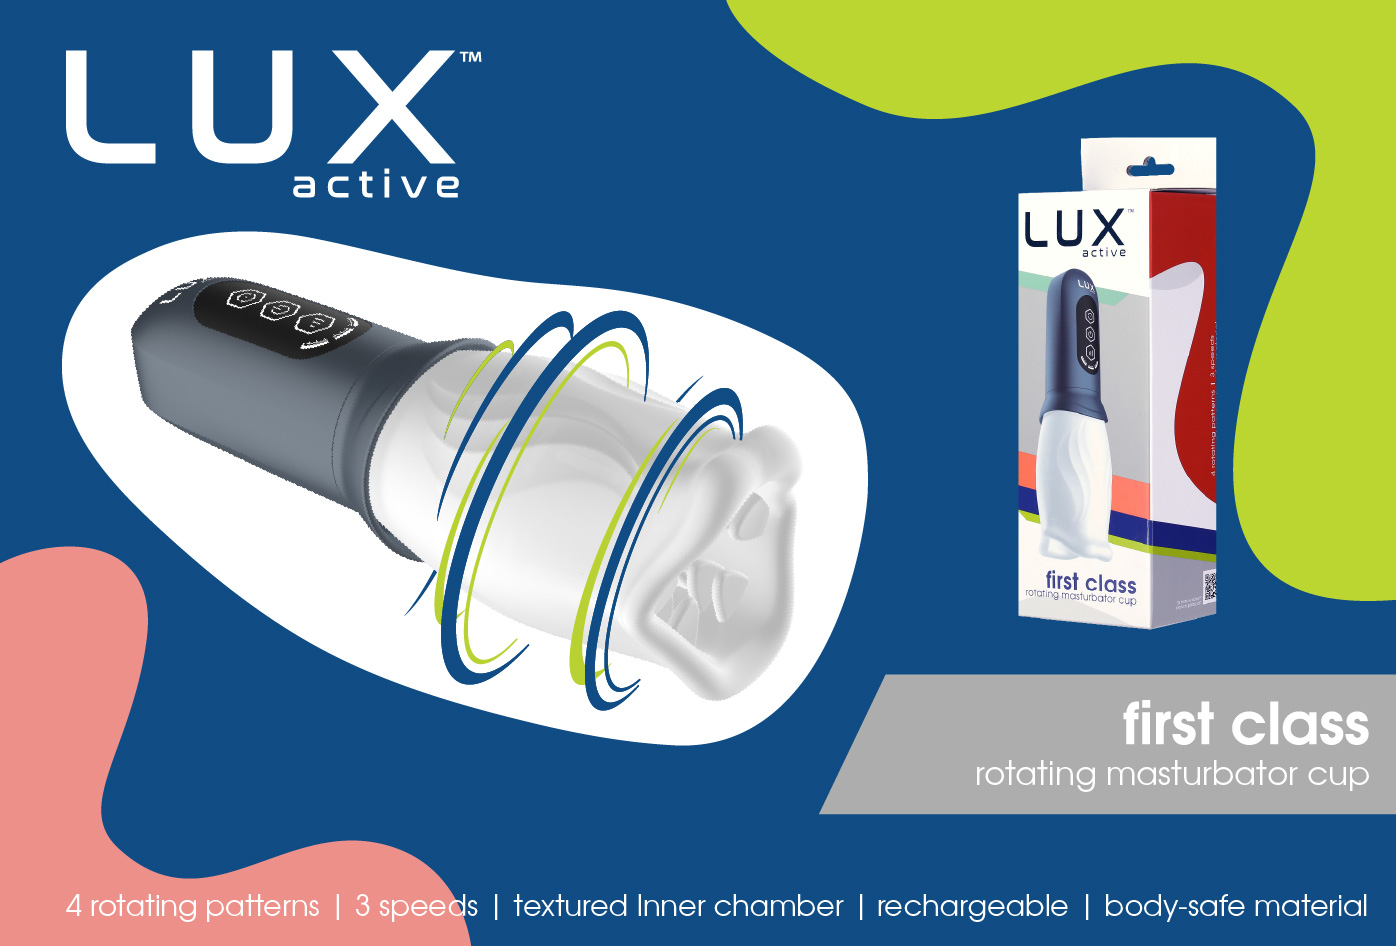  LUX™ Active First Class Rotating Masturbator Cup 